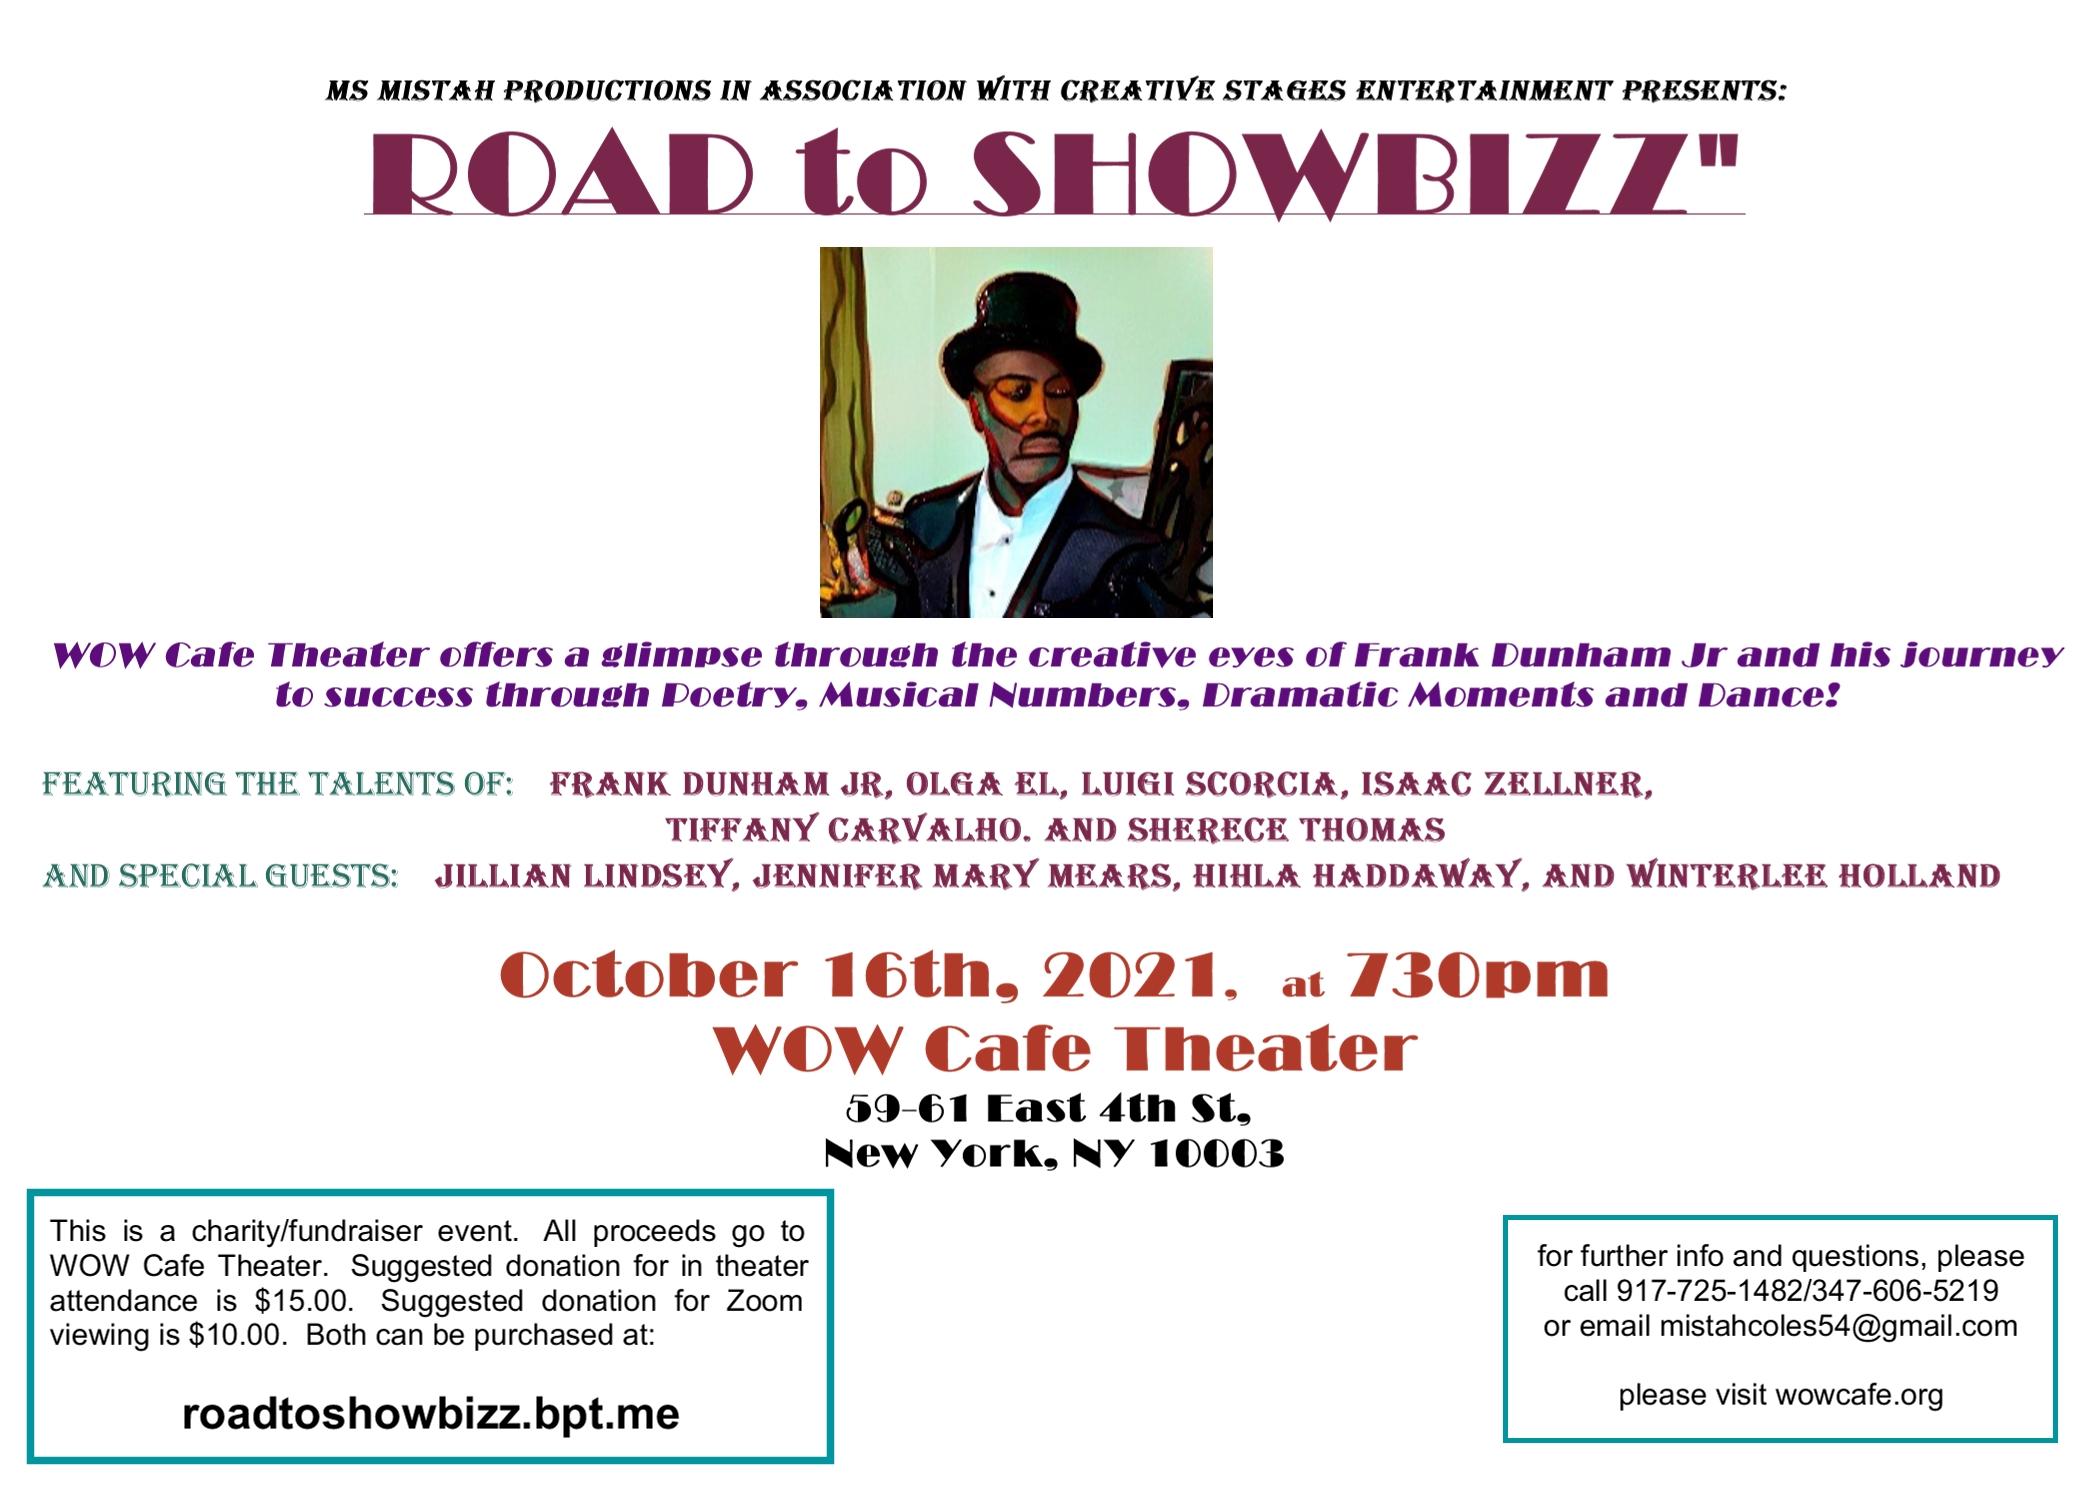 Road to Showbizz October 16 @ 7:30 pm - 9:00 pm Road to Showbizz Saturday, October 16, 2021 7:30pm Eastern time Suggested donations: $15 in theater / $10 Zoom viewing A fundraiser event! All proceeds go to WOW Cafe Theater. WOW Cafe Theater offers a glimpse through the creative eyes of Frank Dunham, Jr